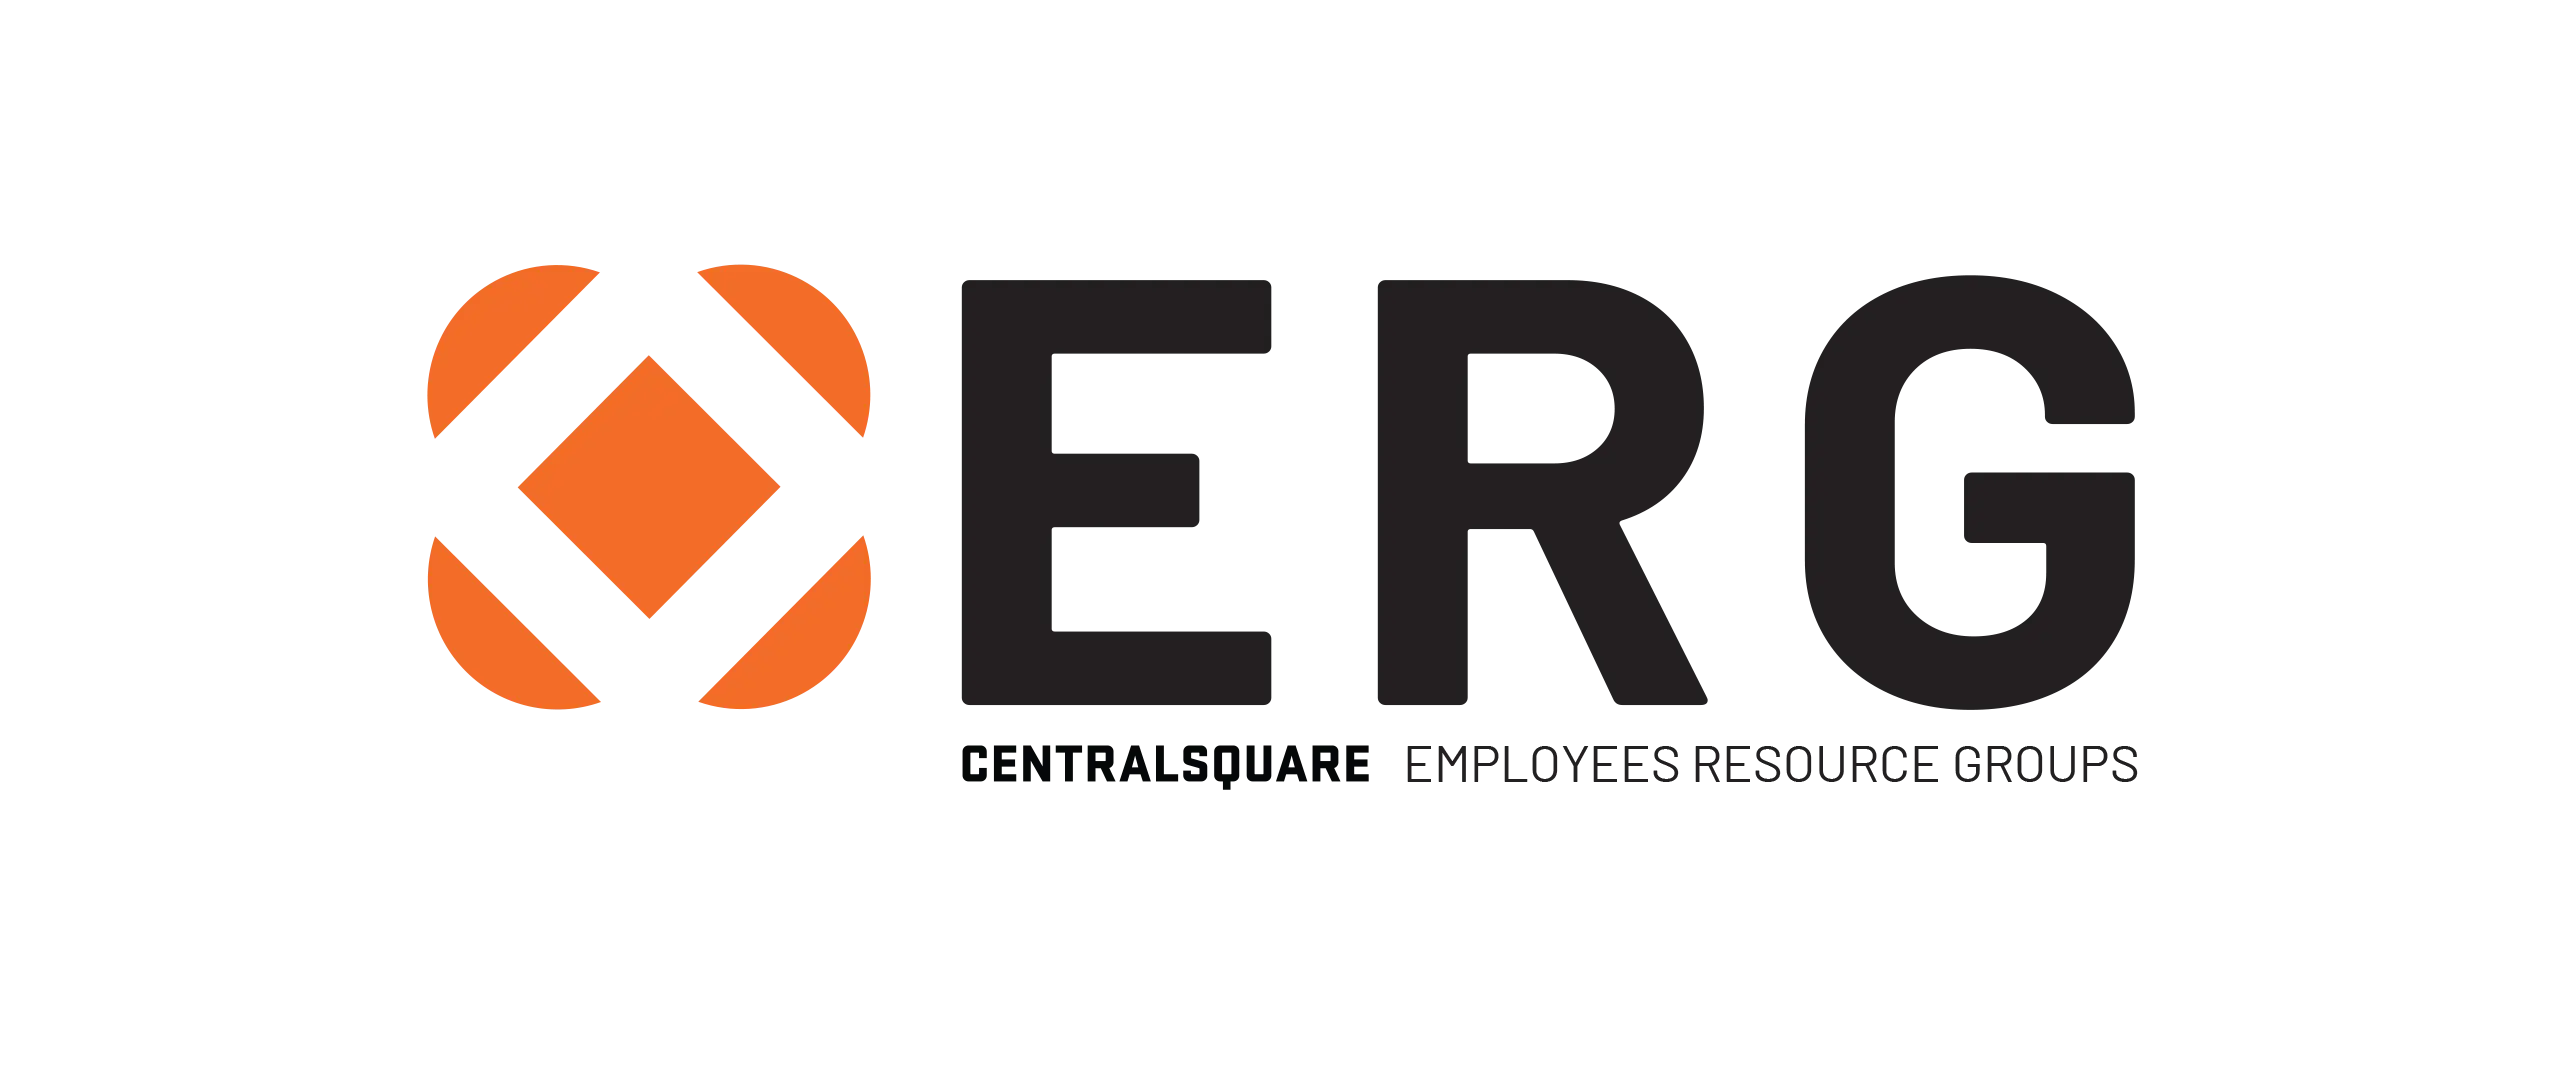 CentralSquare Employee Resource Group logo